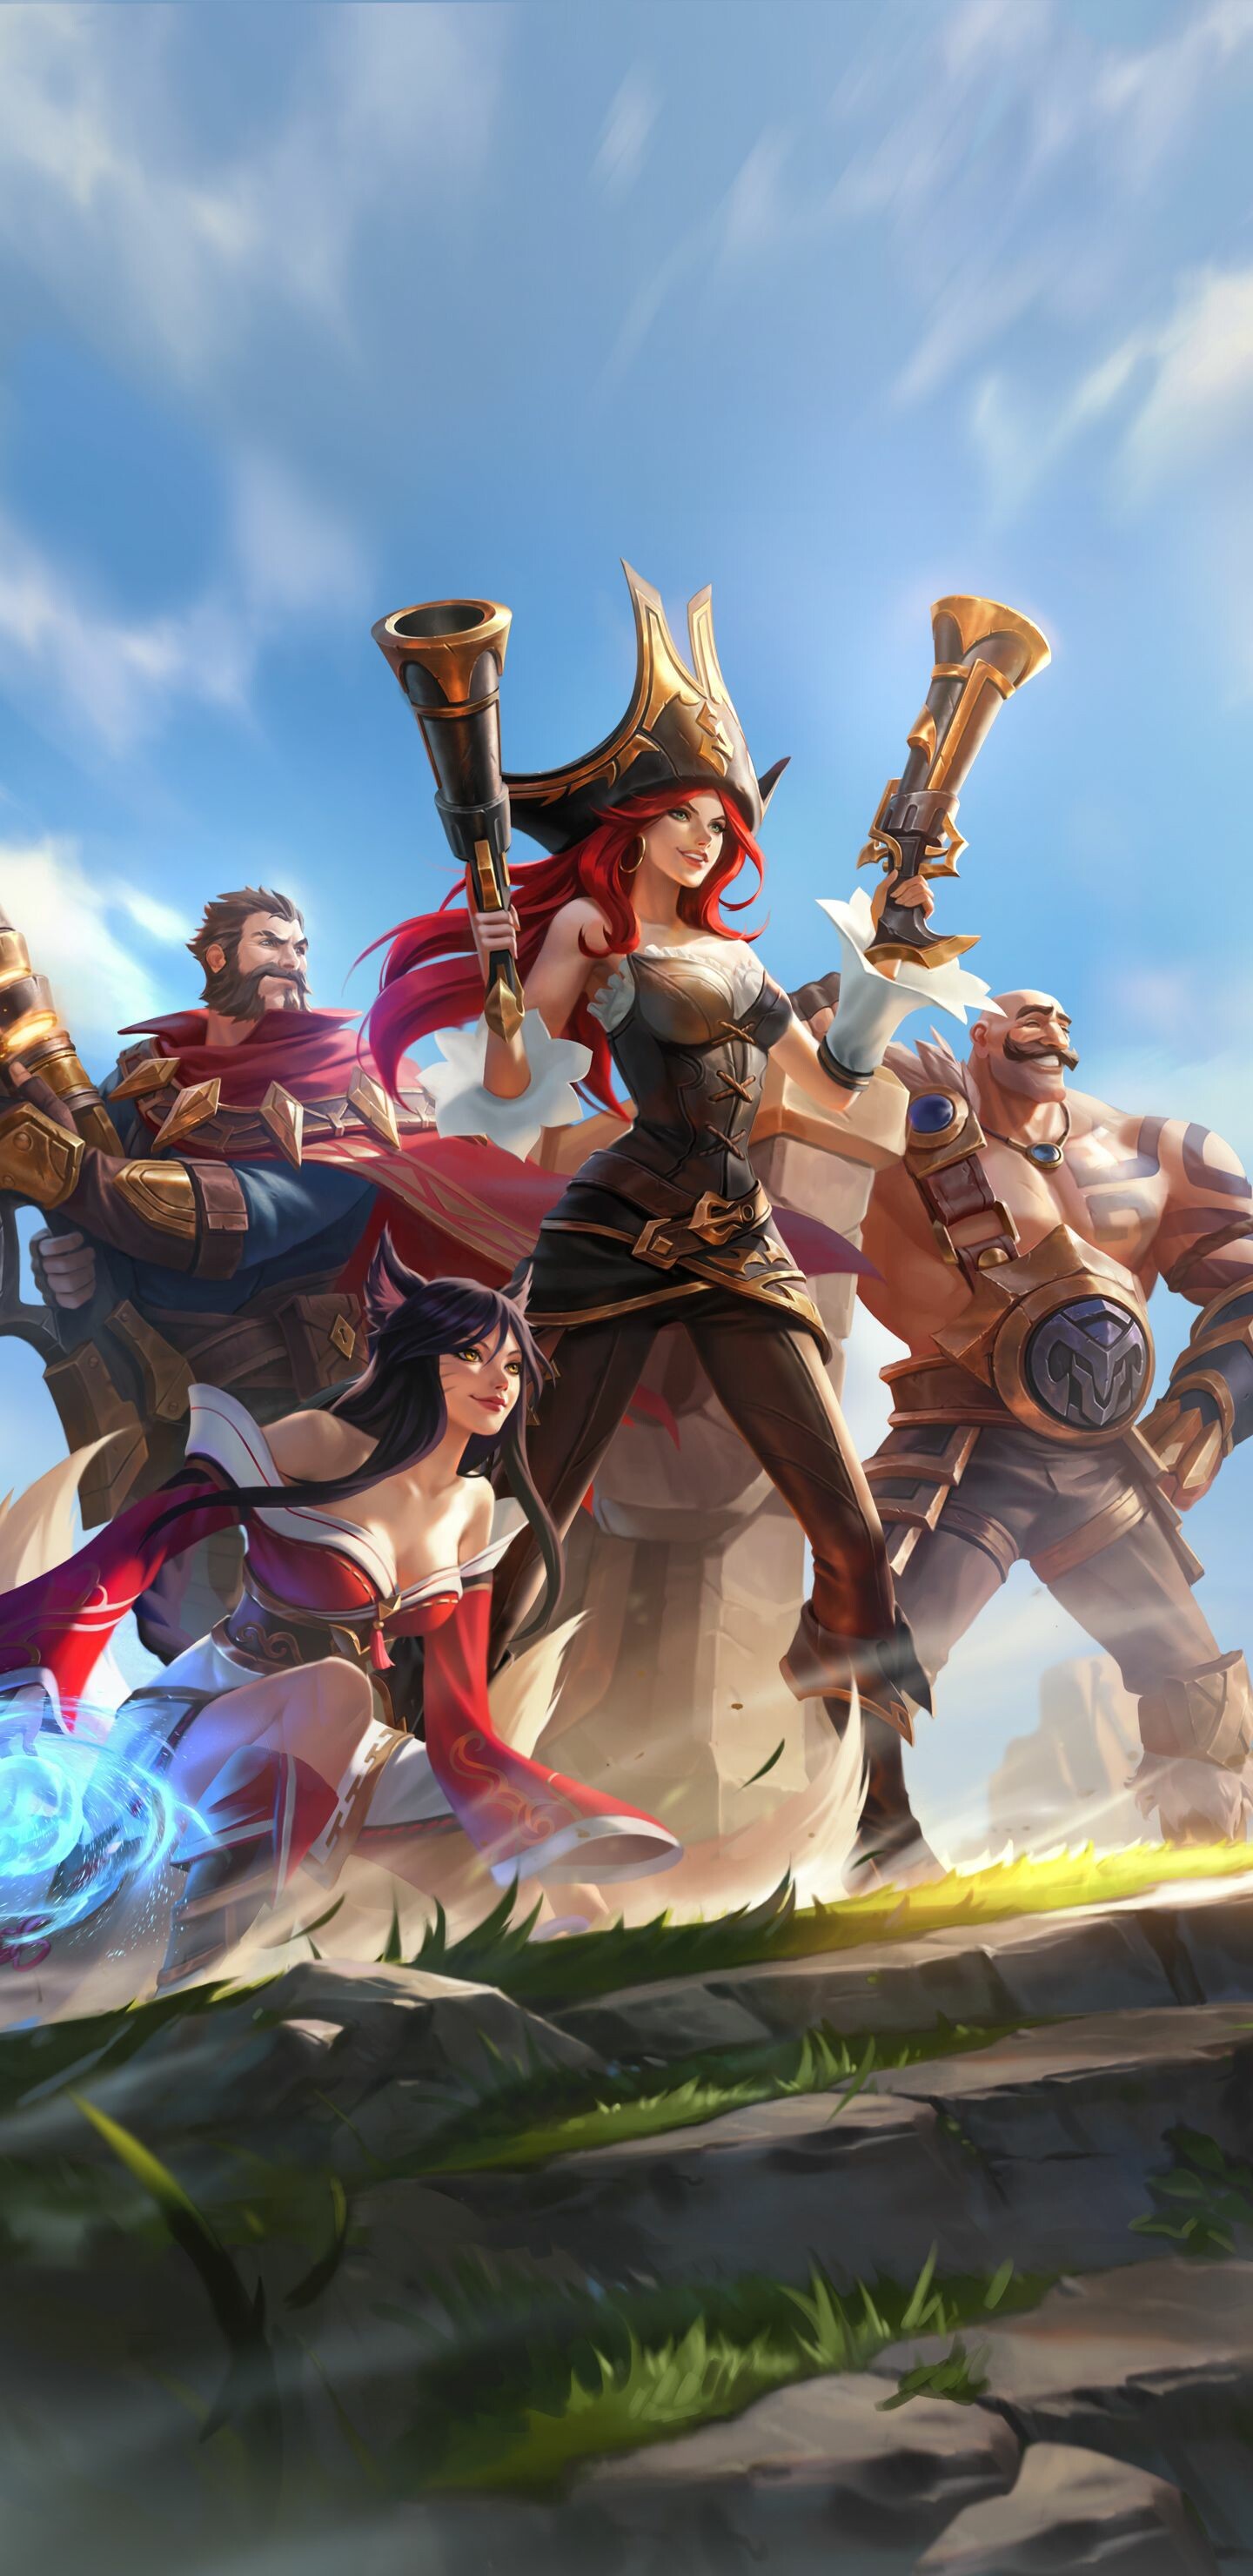 League of Legends: LoL, Free-to-play game, released in October 2009. 1440x2960 HD Wallpaper.